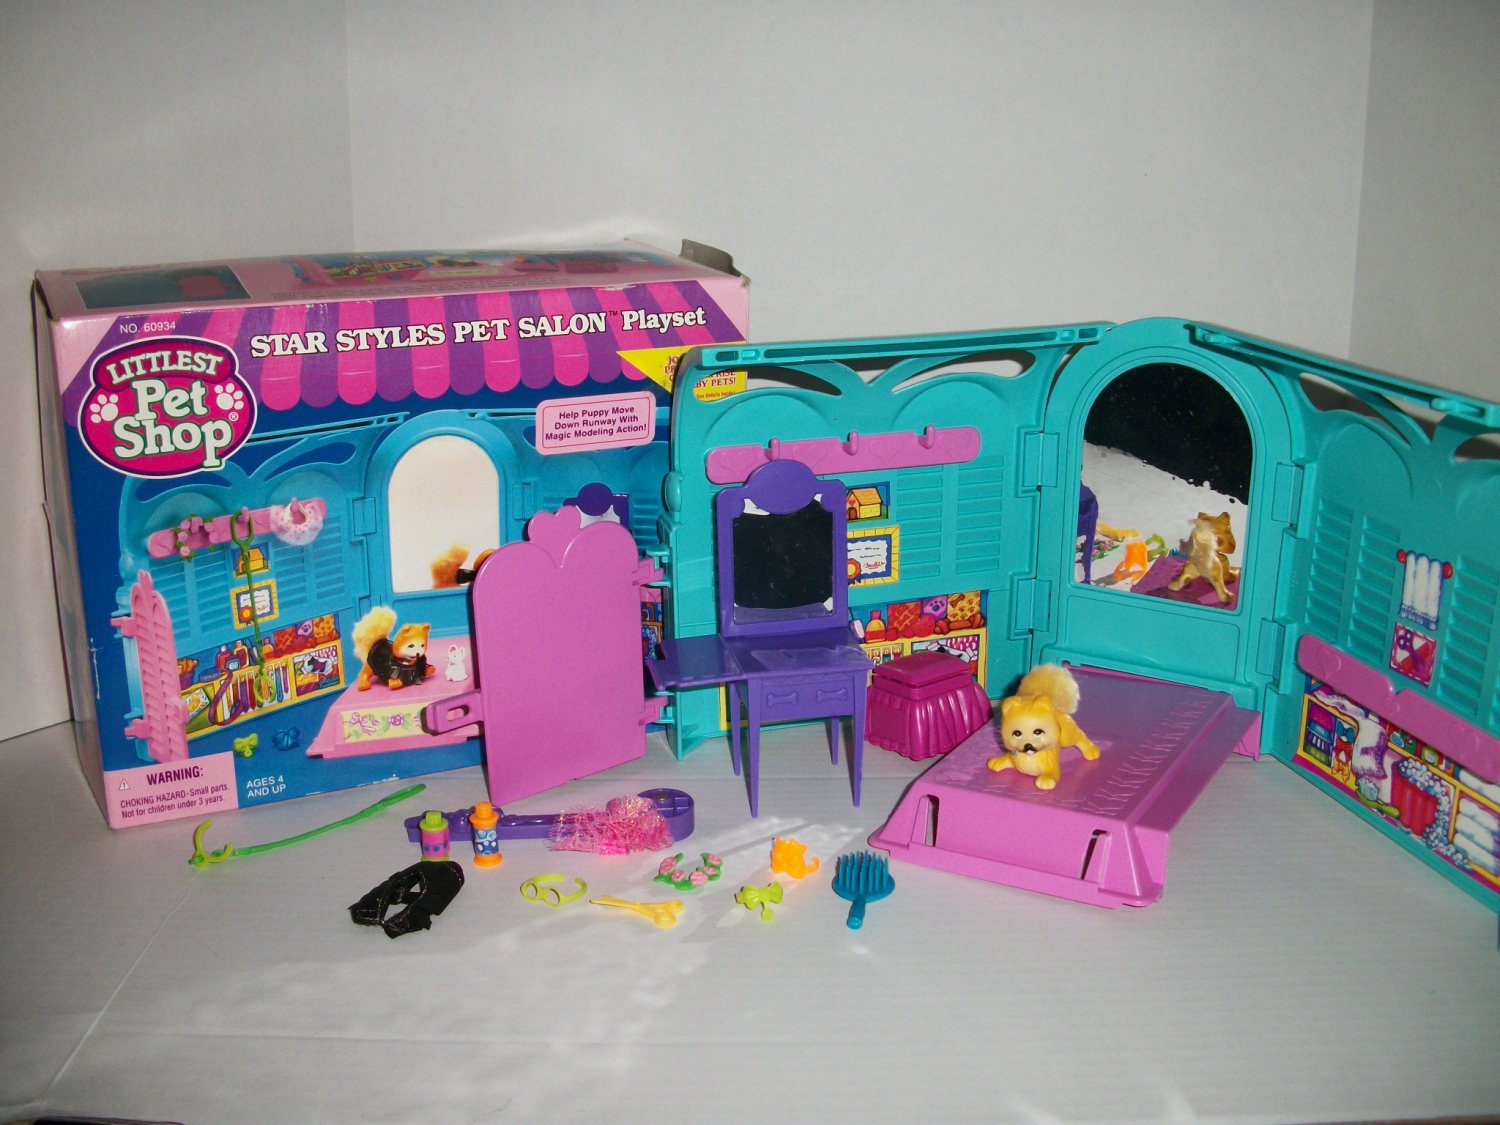 The Original Littlest Pet Shop from 1992 - Before they stylized